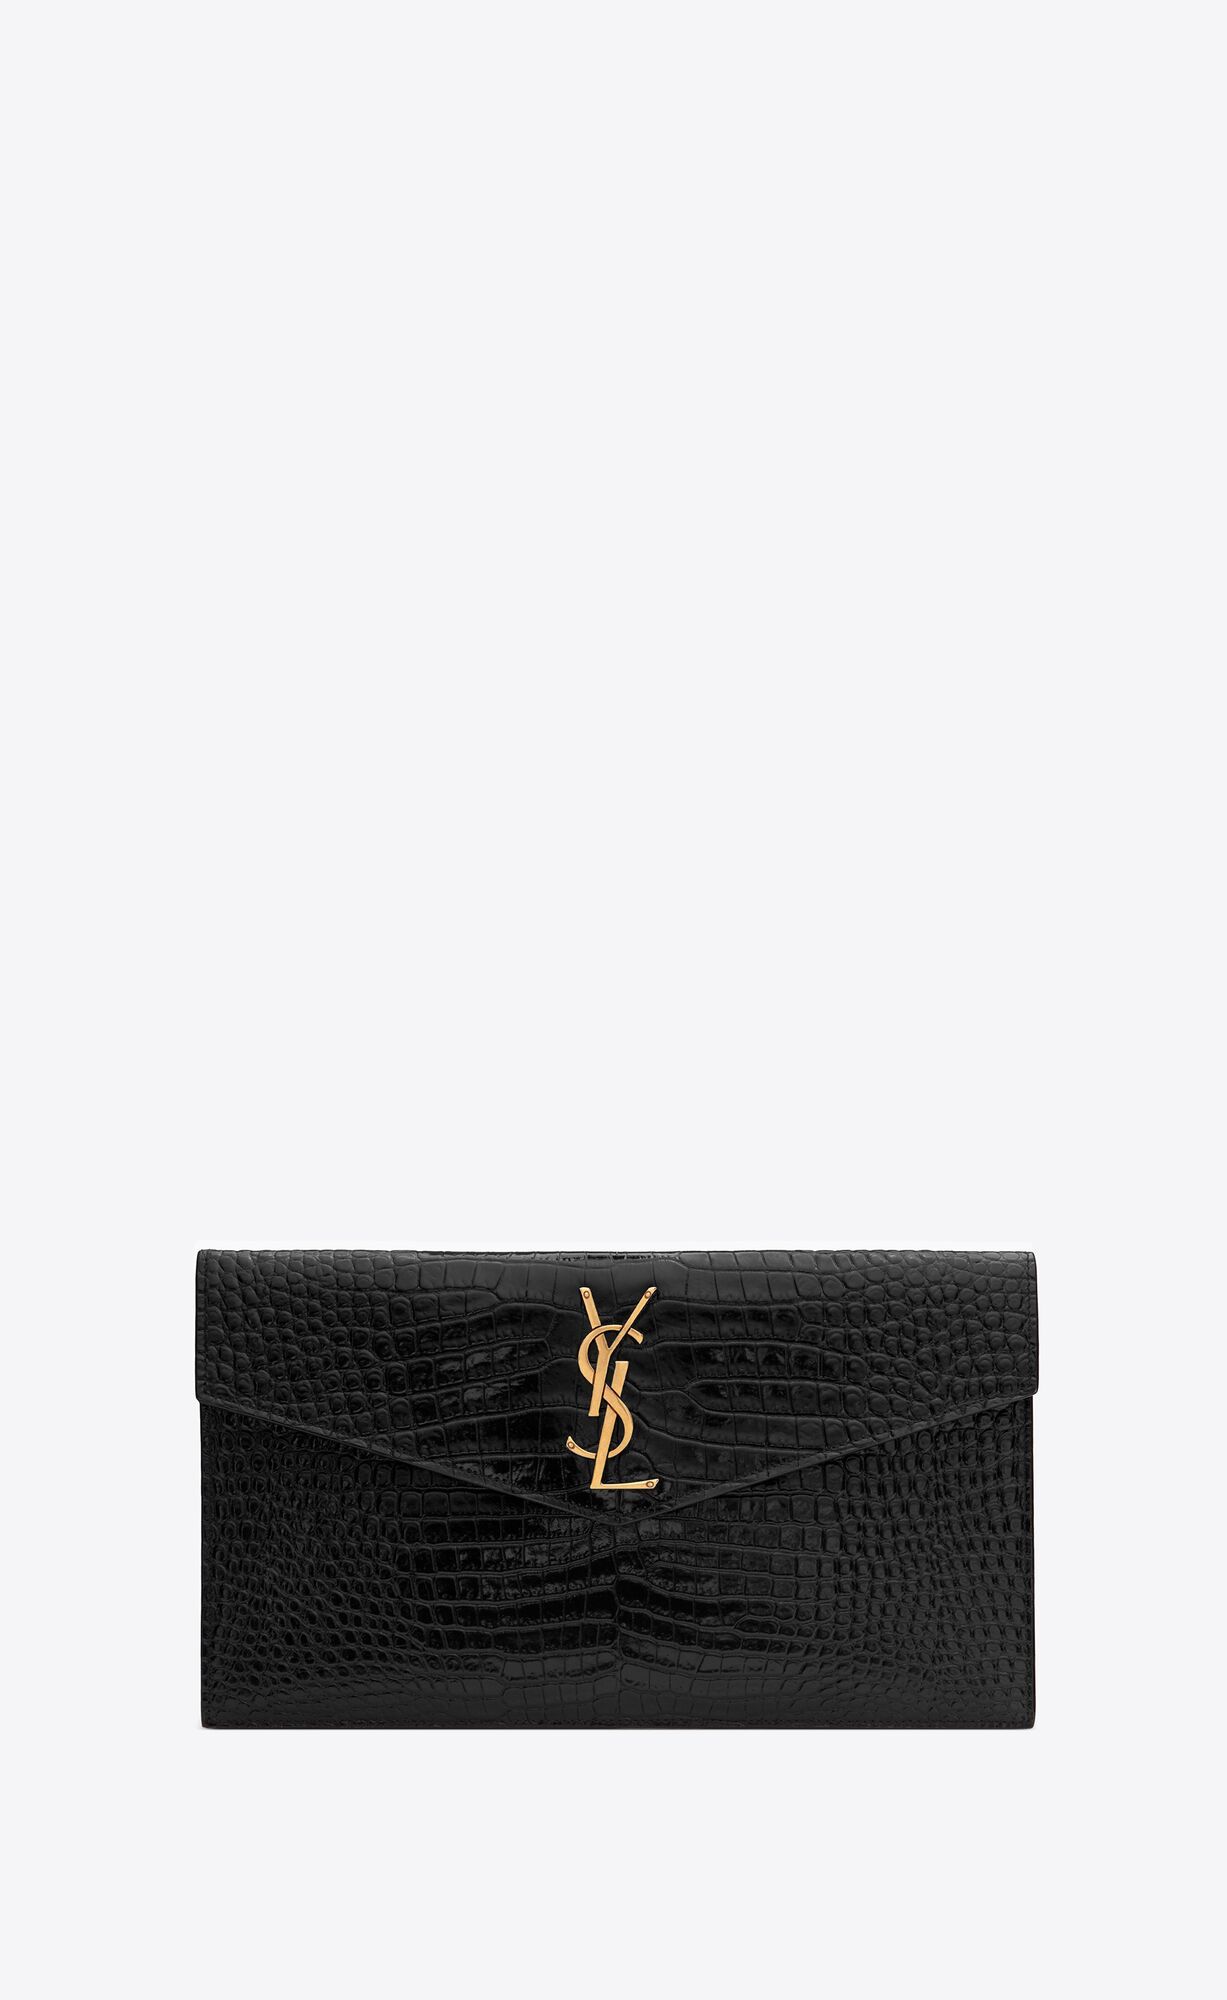 SMALL ENVELOPE POUCH WITH A FLAP DECORATED WITH METAL YSL INITIALS. | Saint Laurent Inc. (Global)